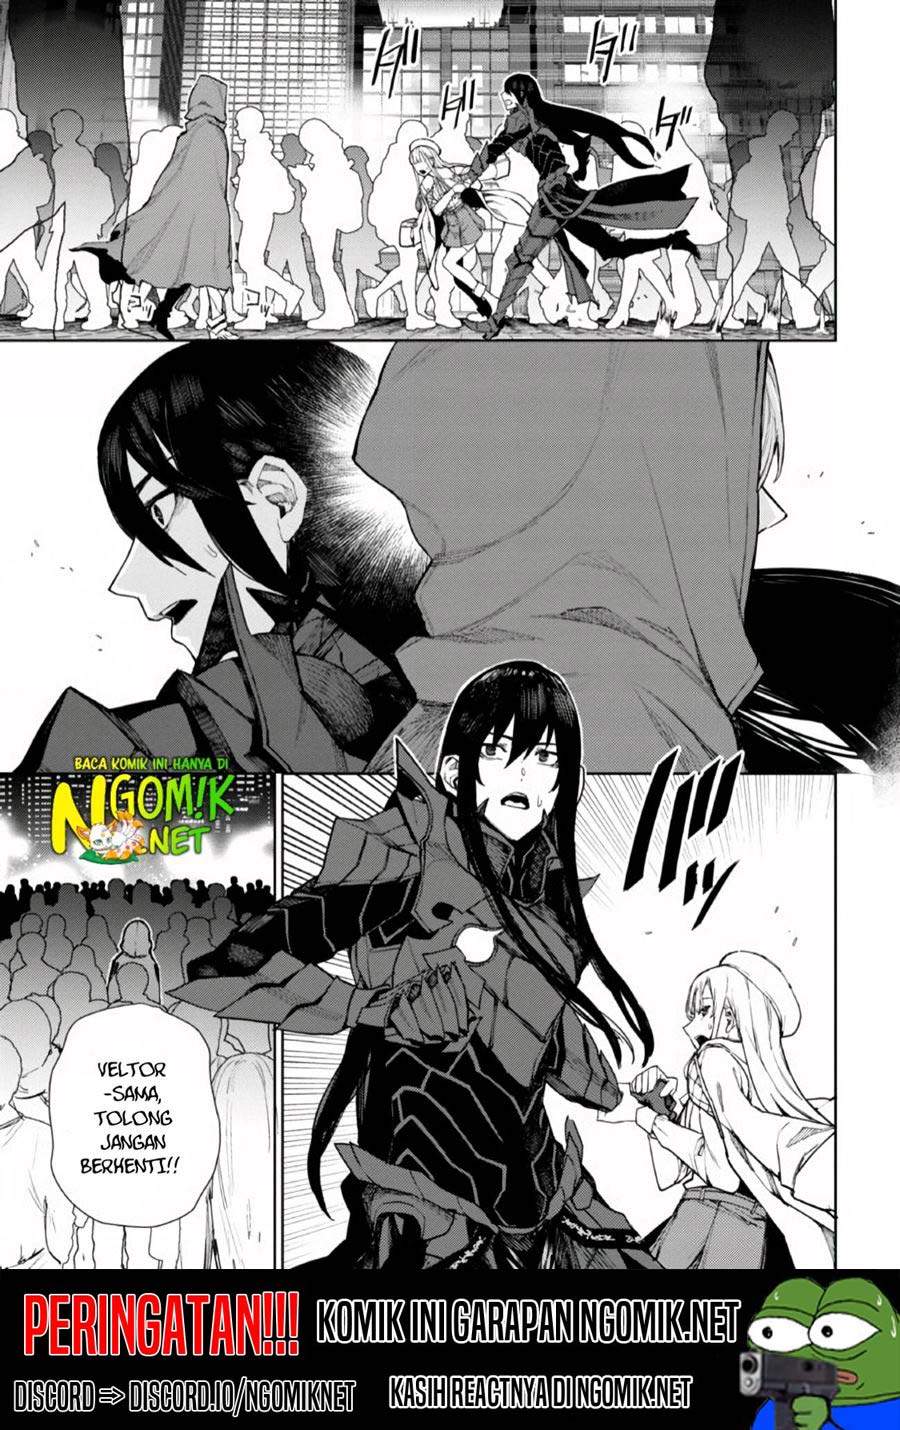 Demon Lord 2099 Chapter 01.1 - 197